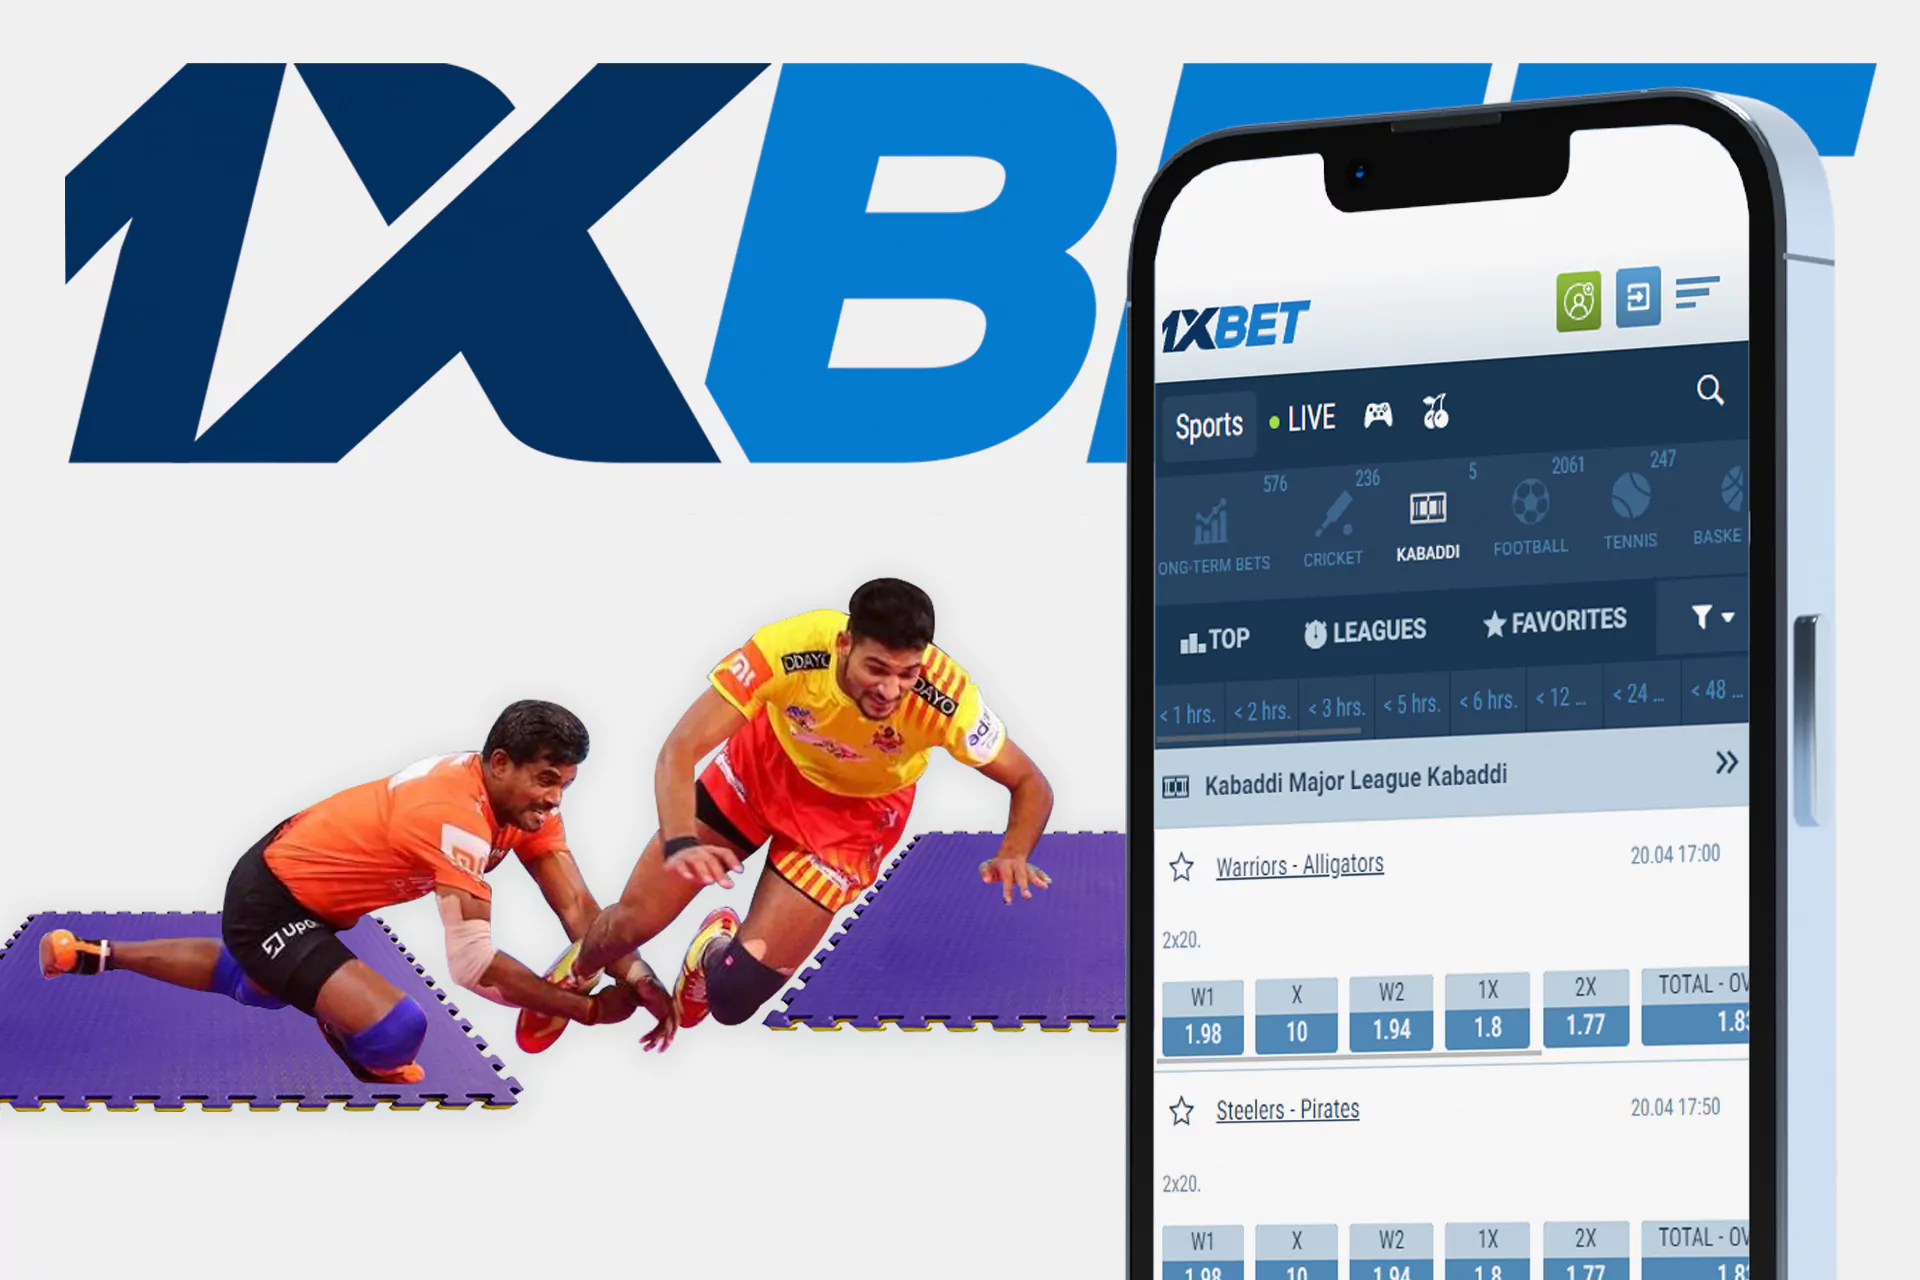 Users of the 1xBet app can bet on kabaddi competitions.